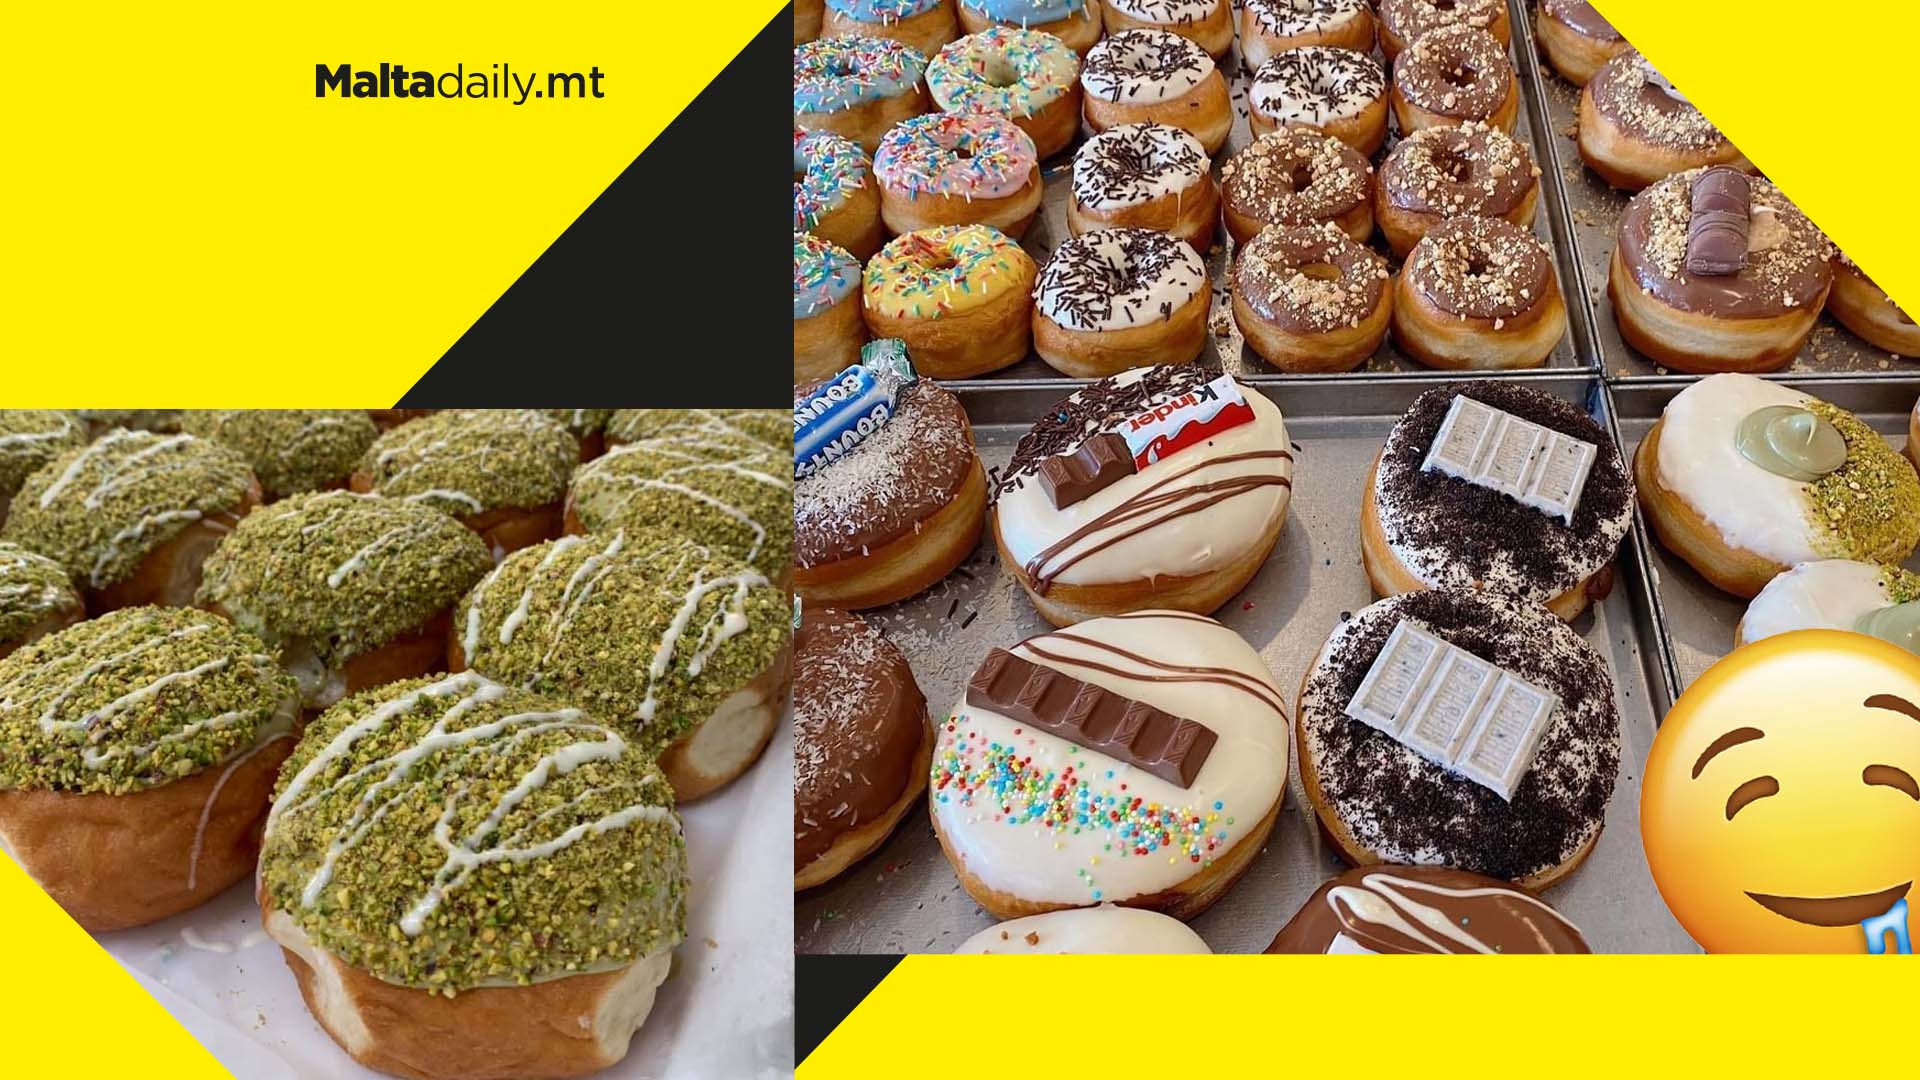 Do-nut worry! Here are five of Malta's best doughnut spots